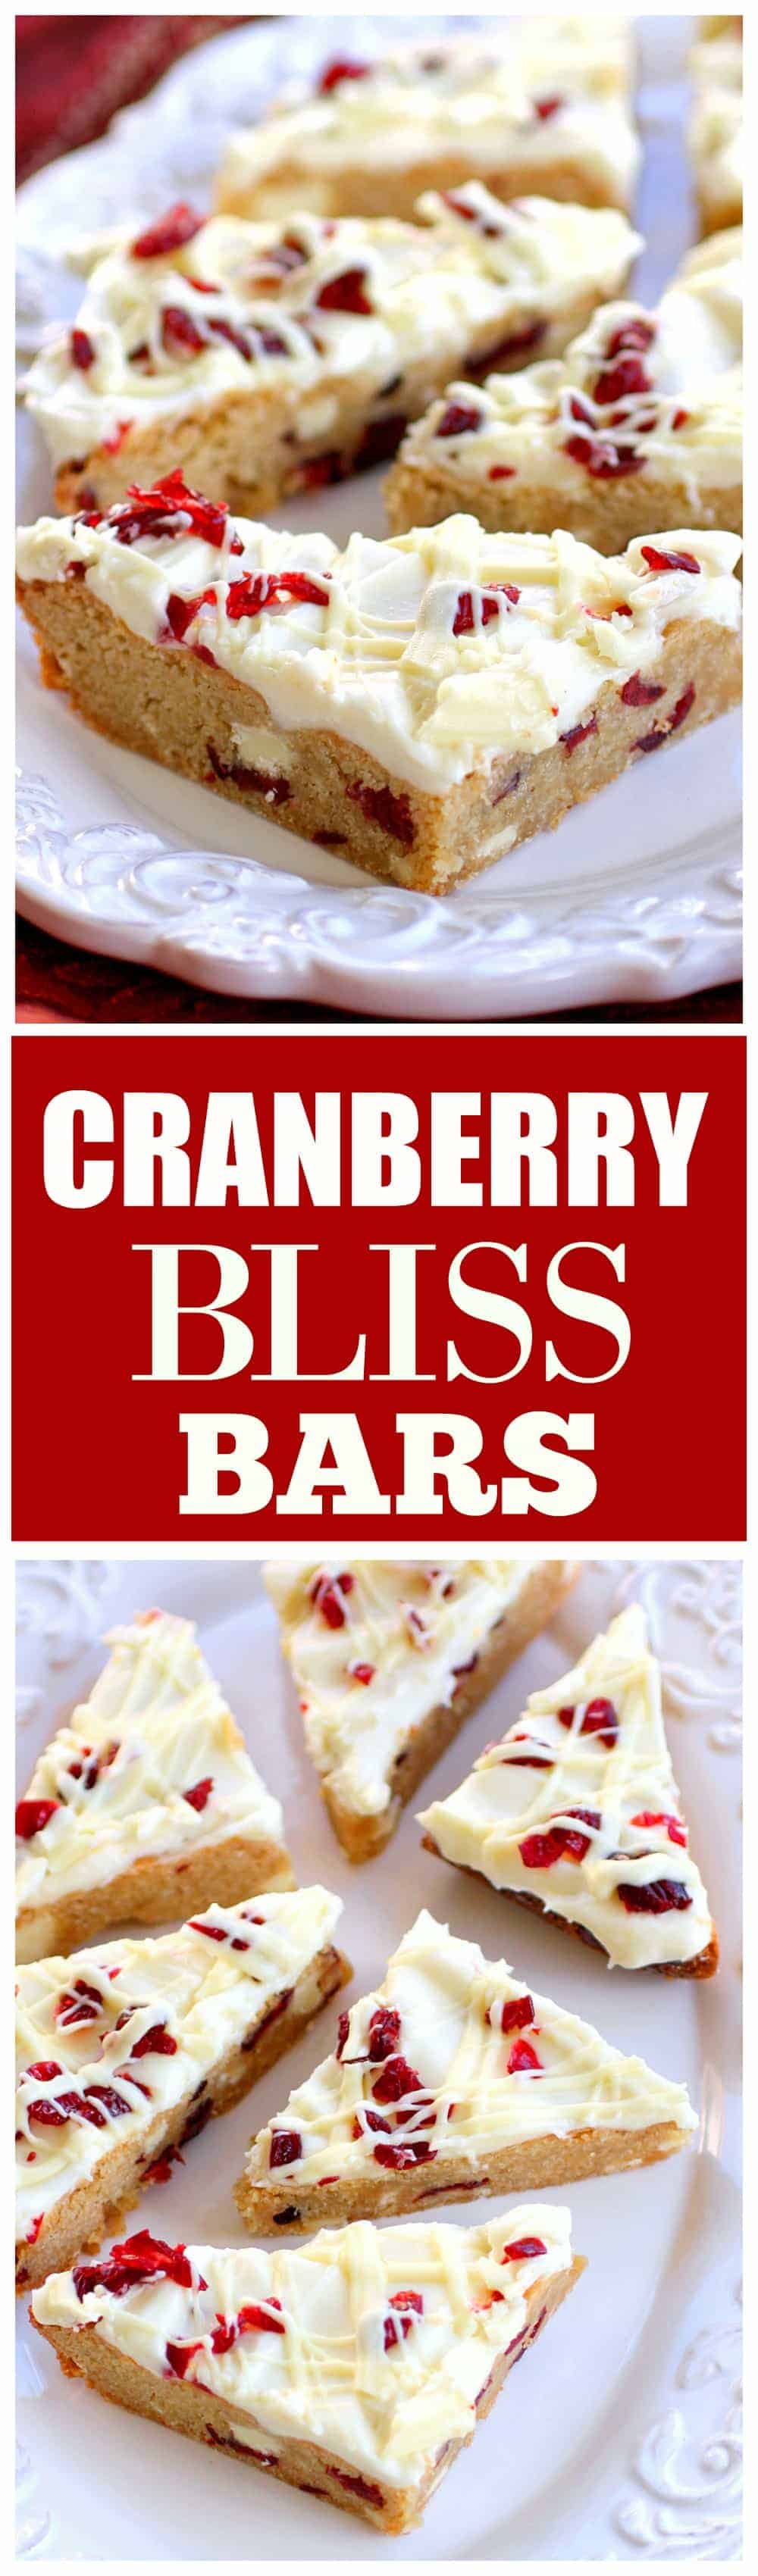 Cranberry Bliss Bars - a knockoff of the Starbuck's treat. A blondie dotted with white chocolate and cranberries with a slight hint of orange. #cranberry #bliss #bars #starbucks #dessert 